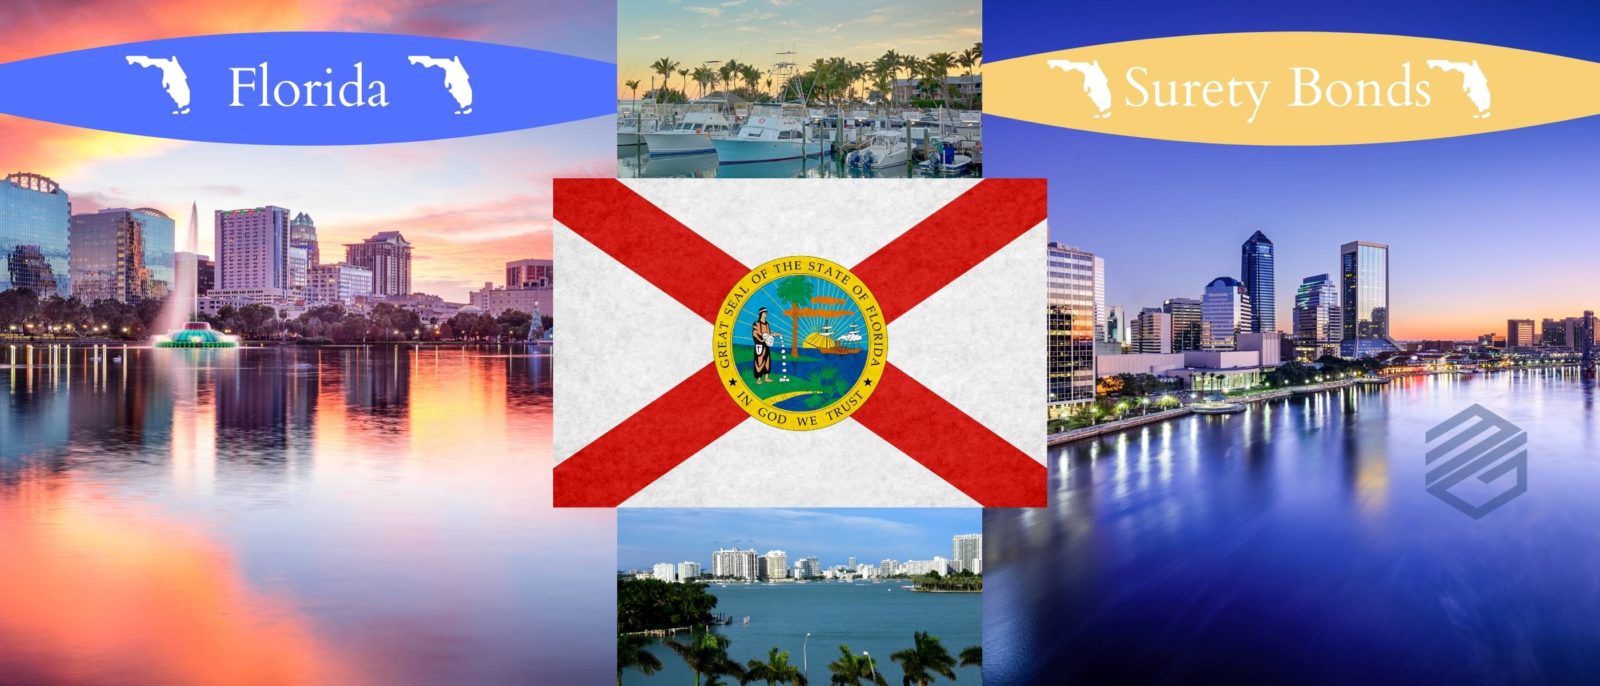 Florida Surety Bonds - Five pictures representing the state of Florida including Jacksonville, Orlando, Miami, Key West and the Florida State Flag. Two text boxes read, "Florida Surety Bonds".